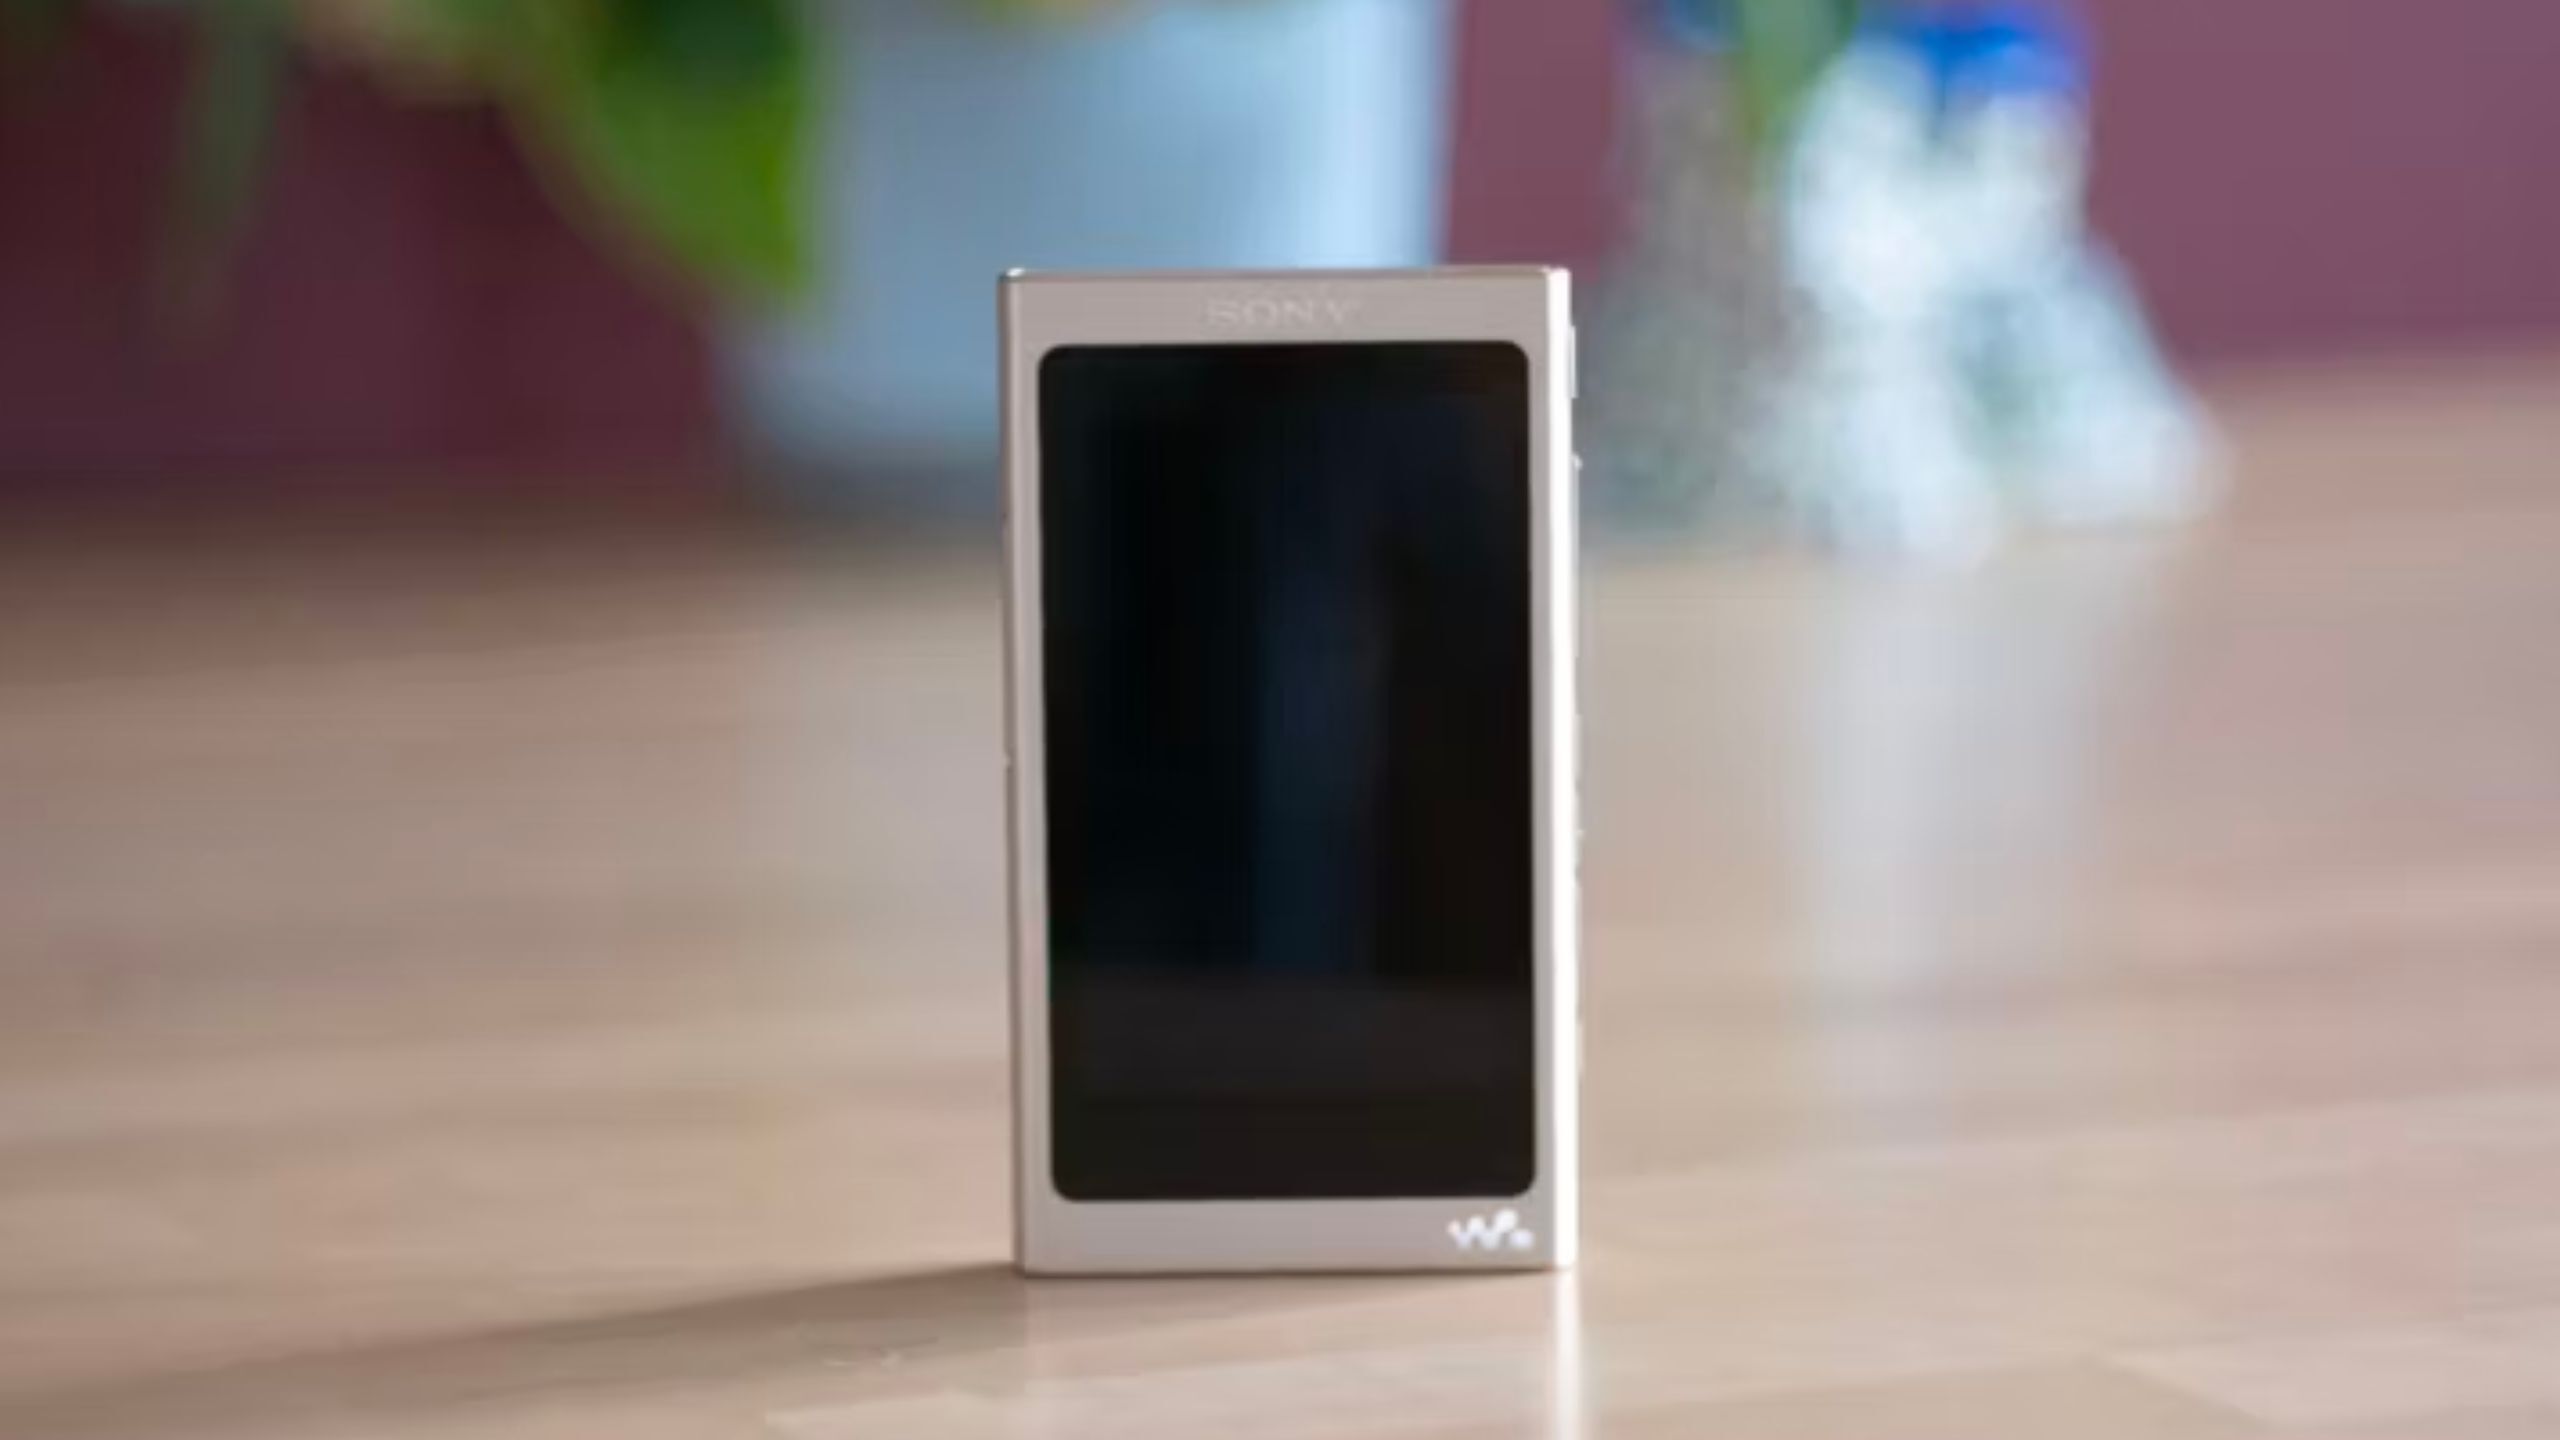 Sony NW-A45 MP3 standing upright - front side